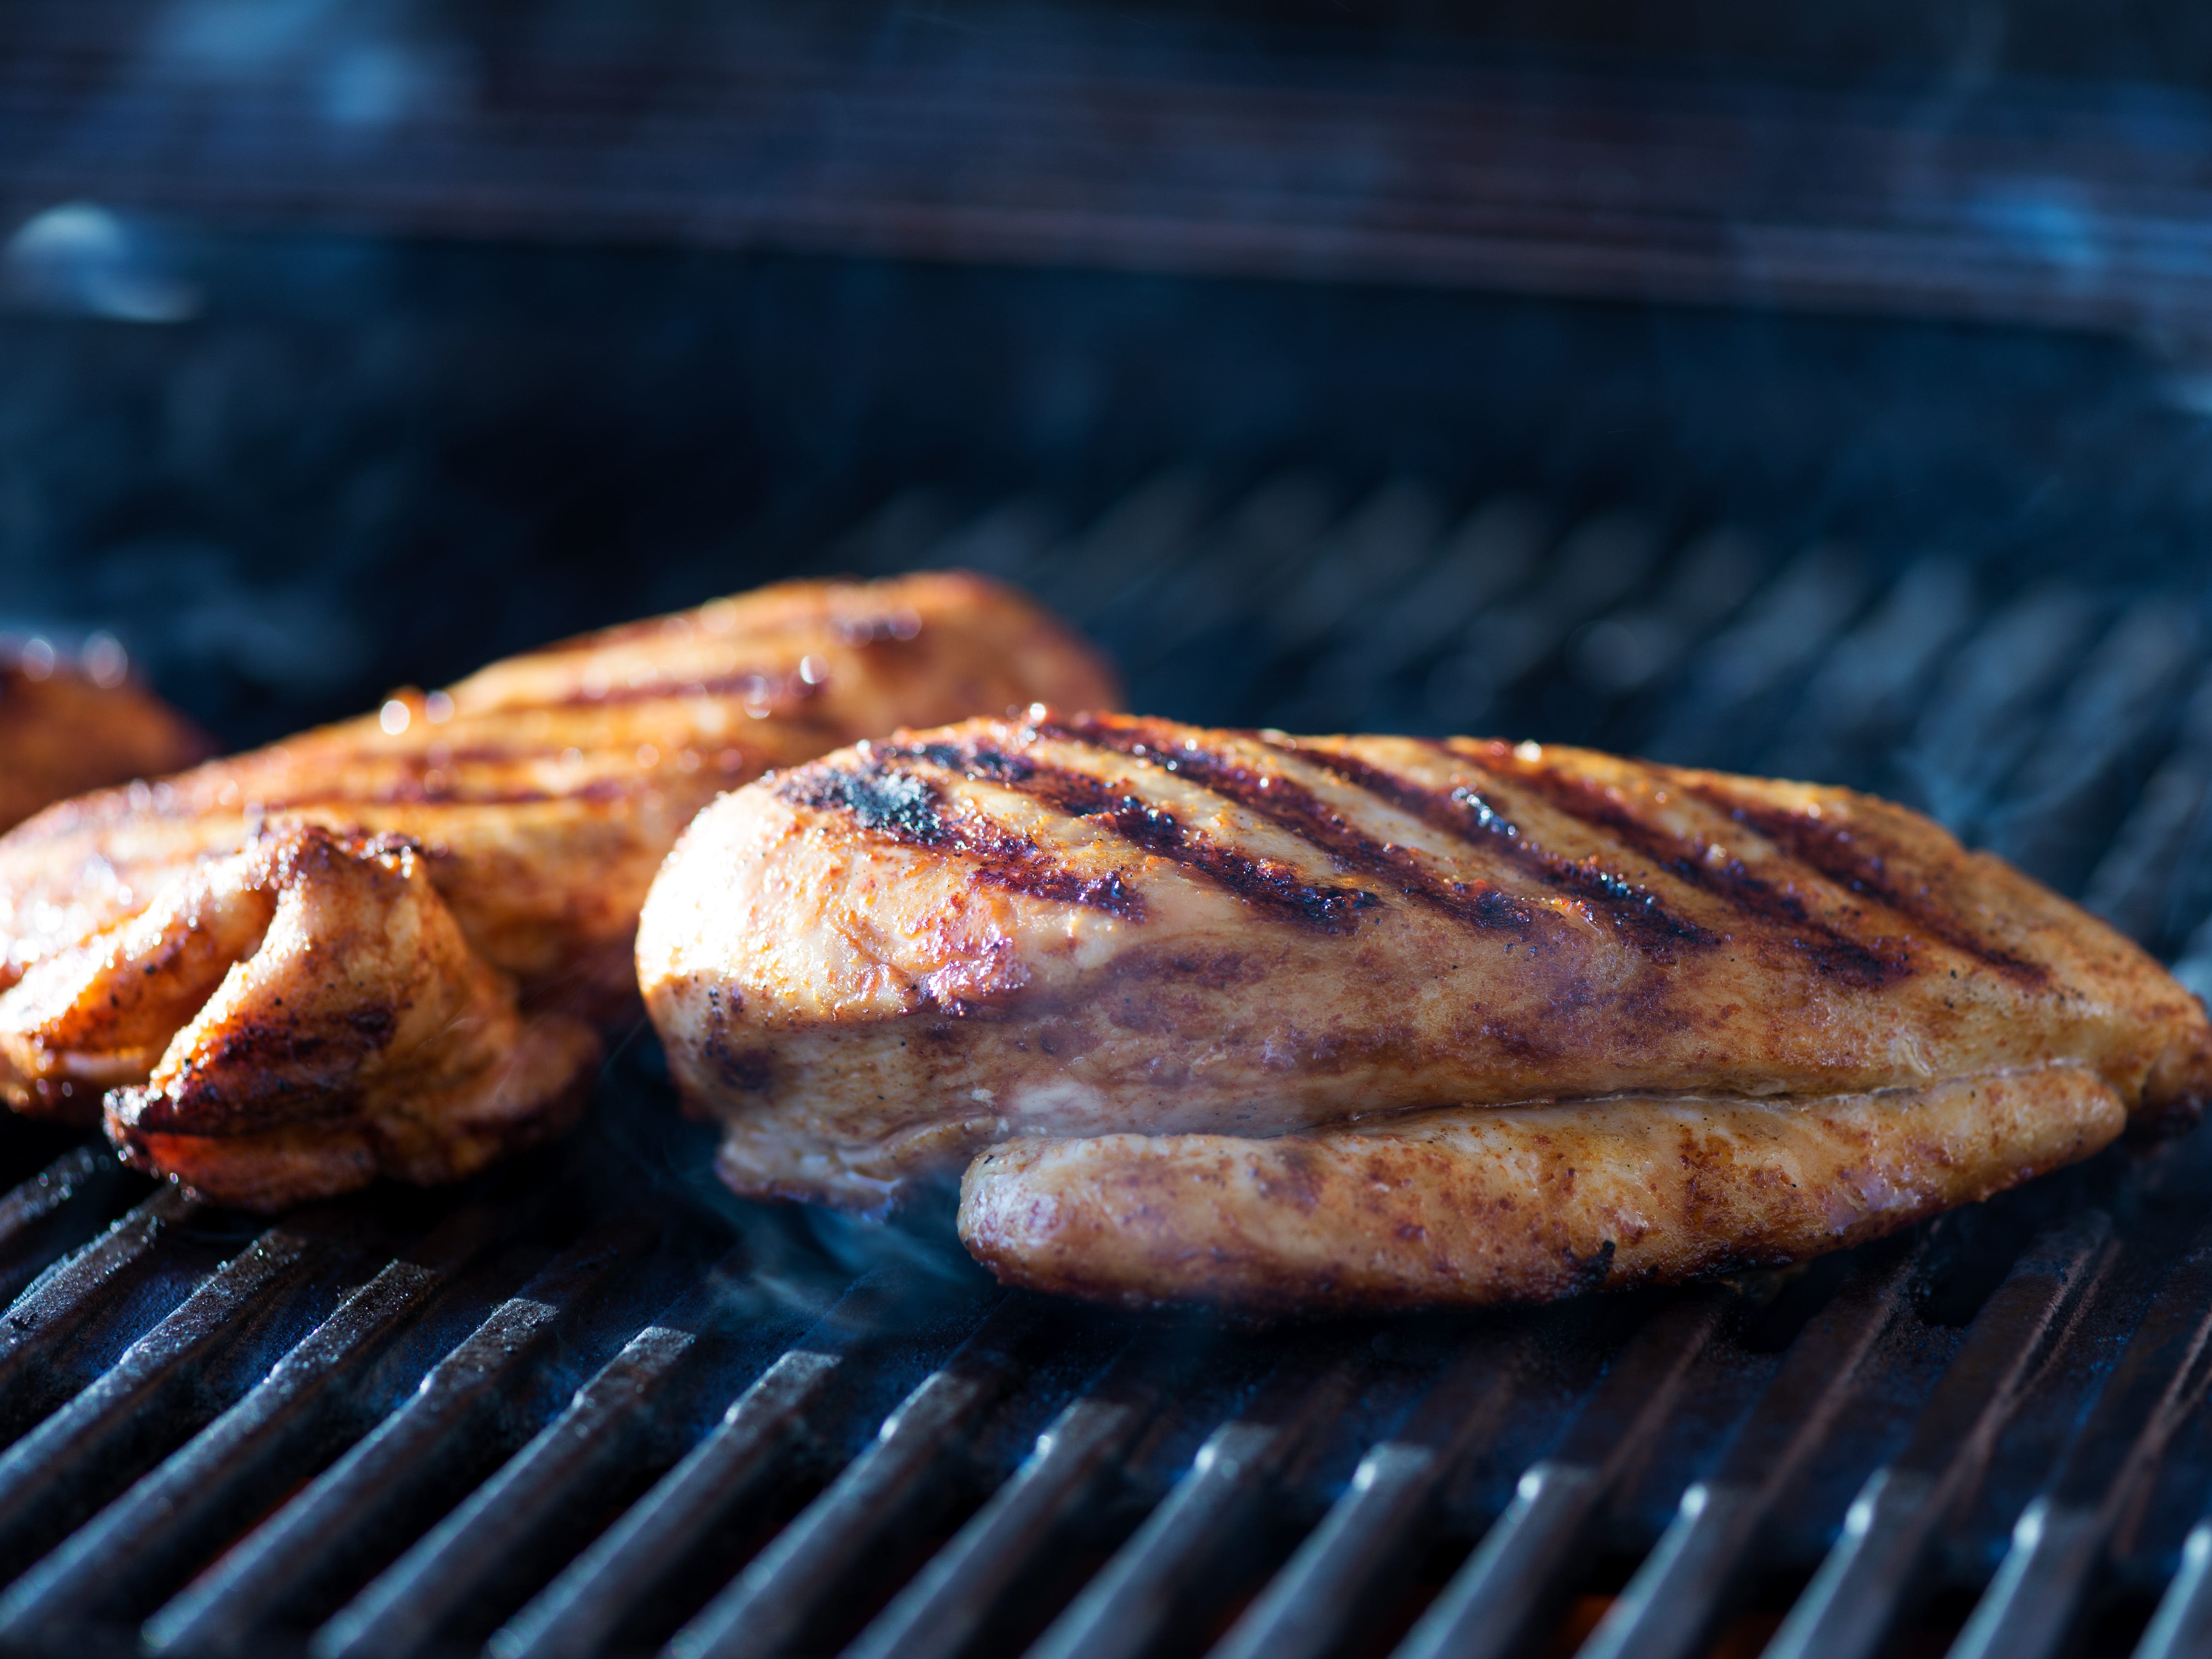 I've been a chef for 15 years. Here are my 6 tips for making the best grilled chicken.